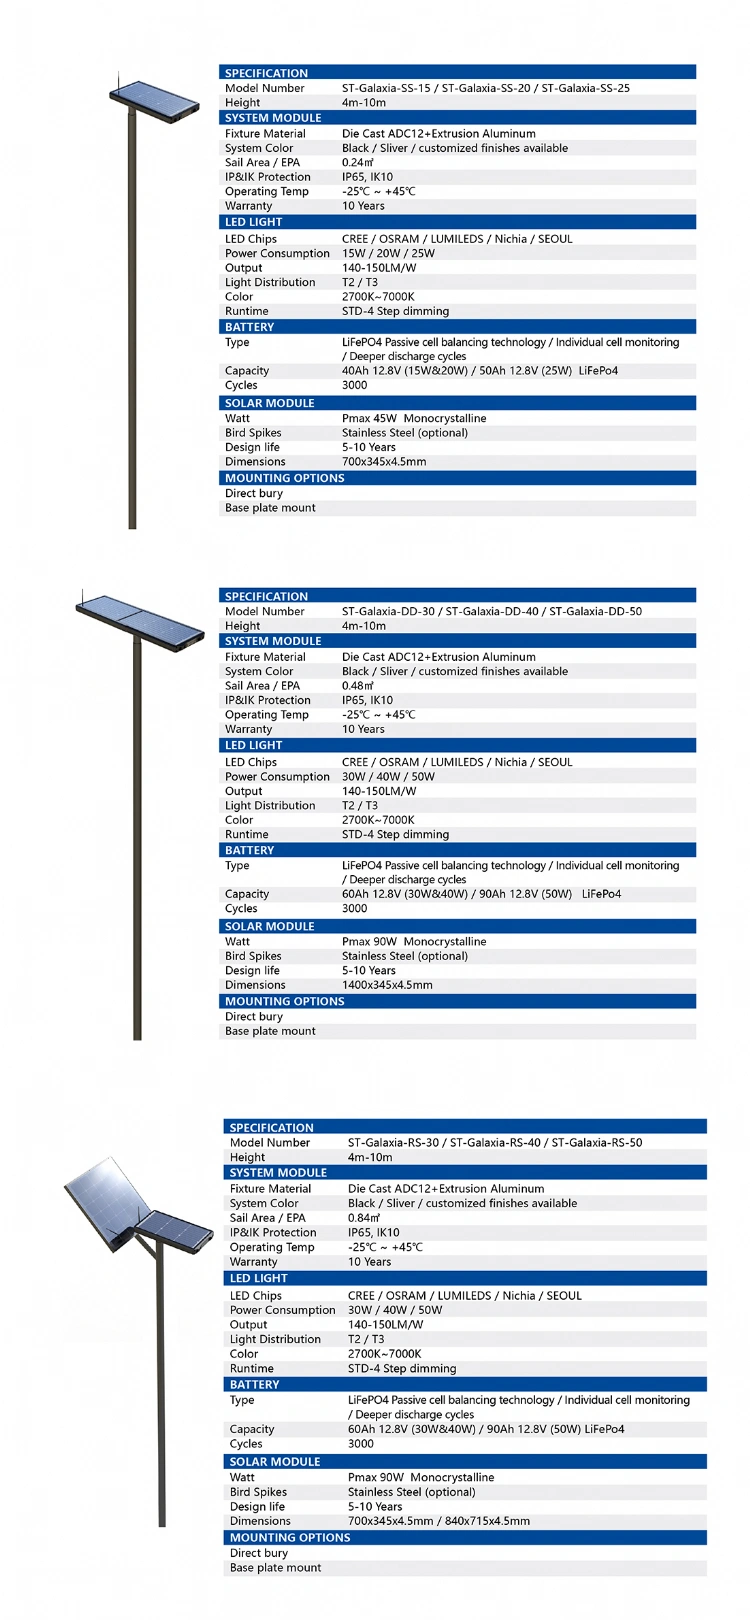 LED Solar Street Light-Galaxia-All in One